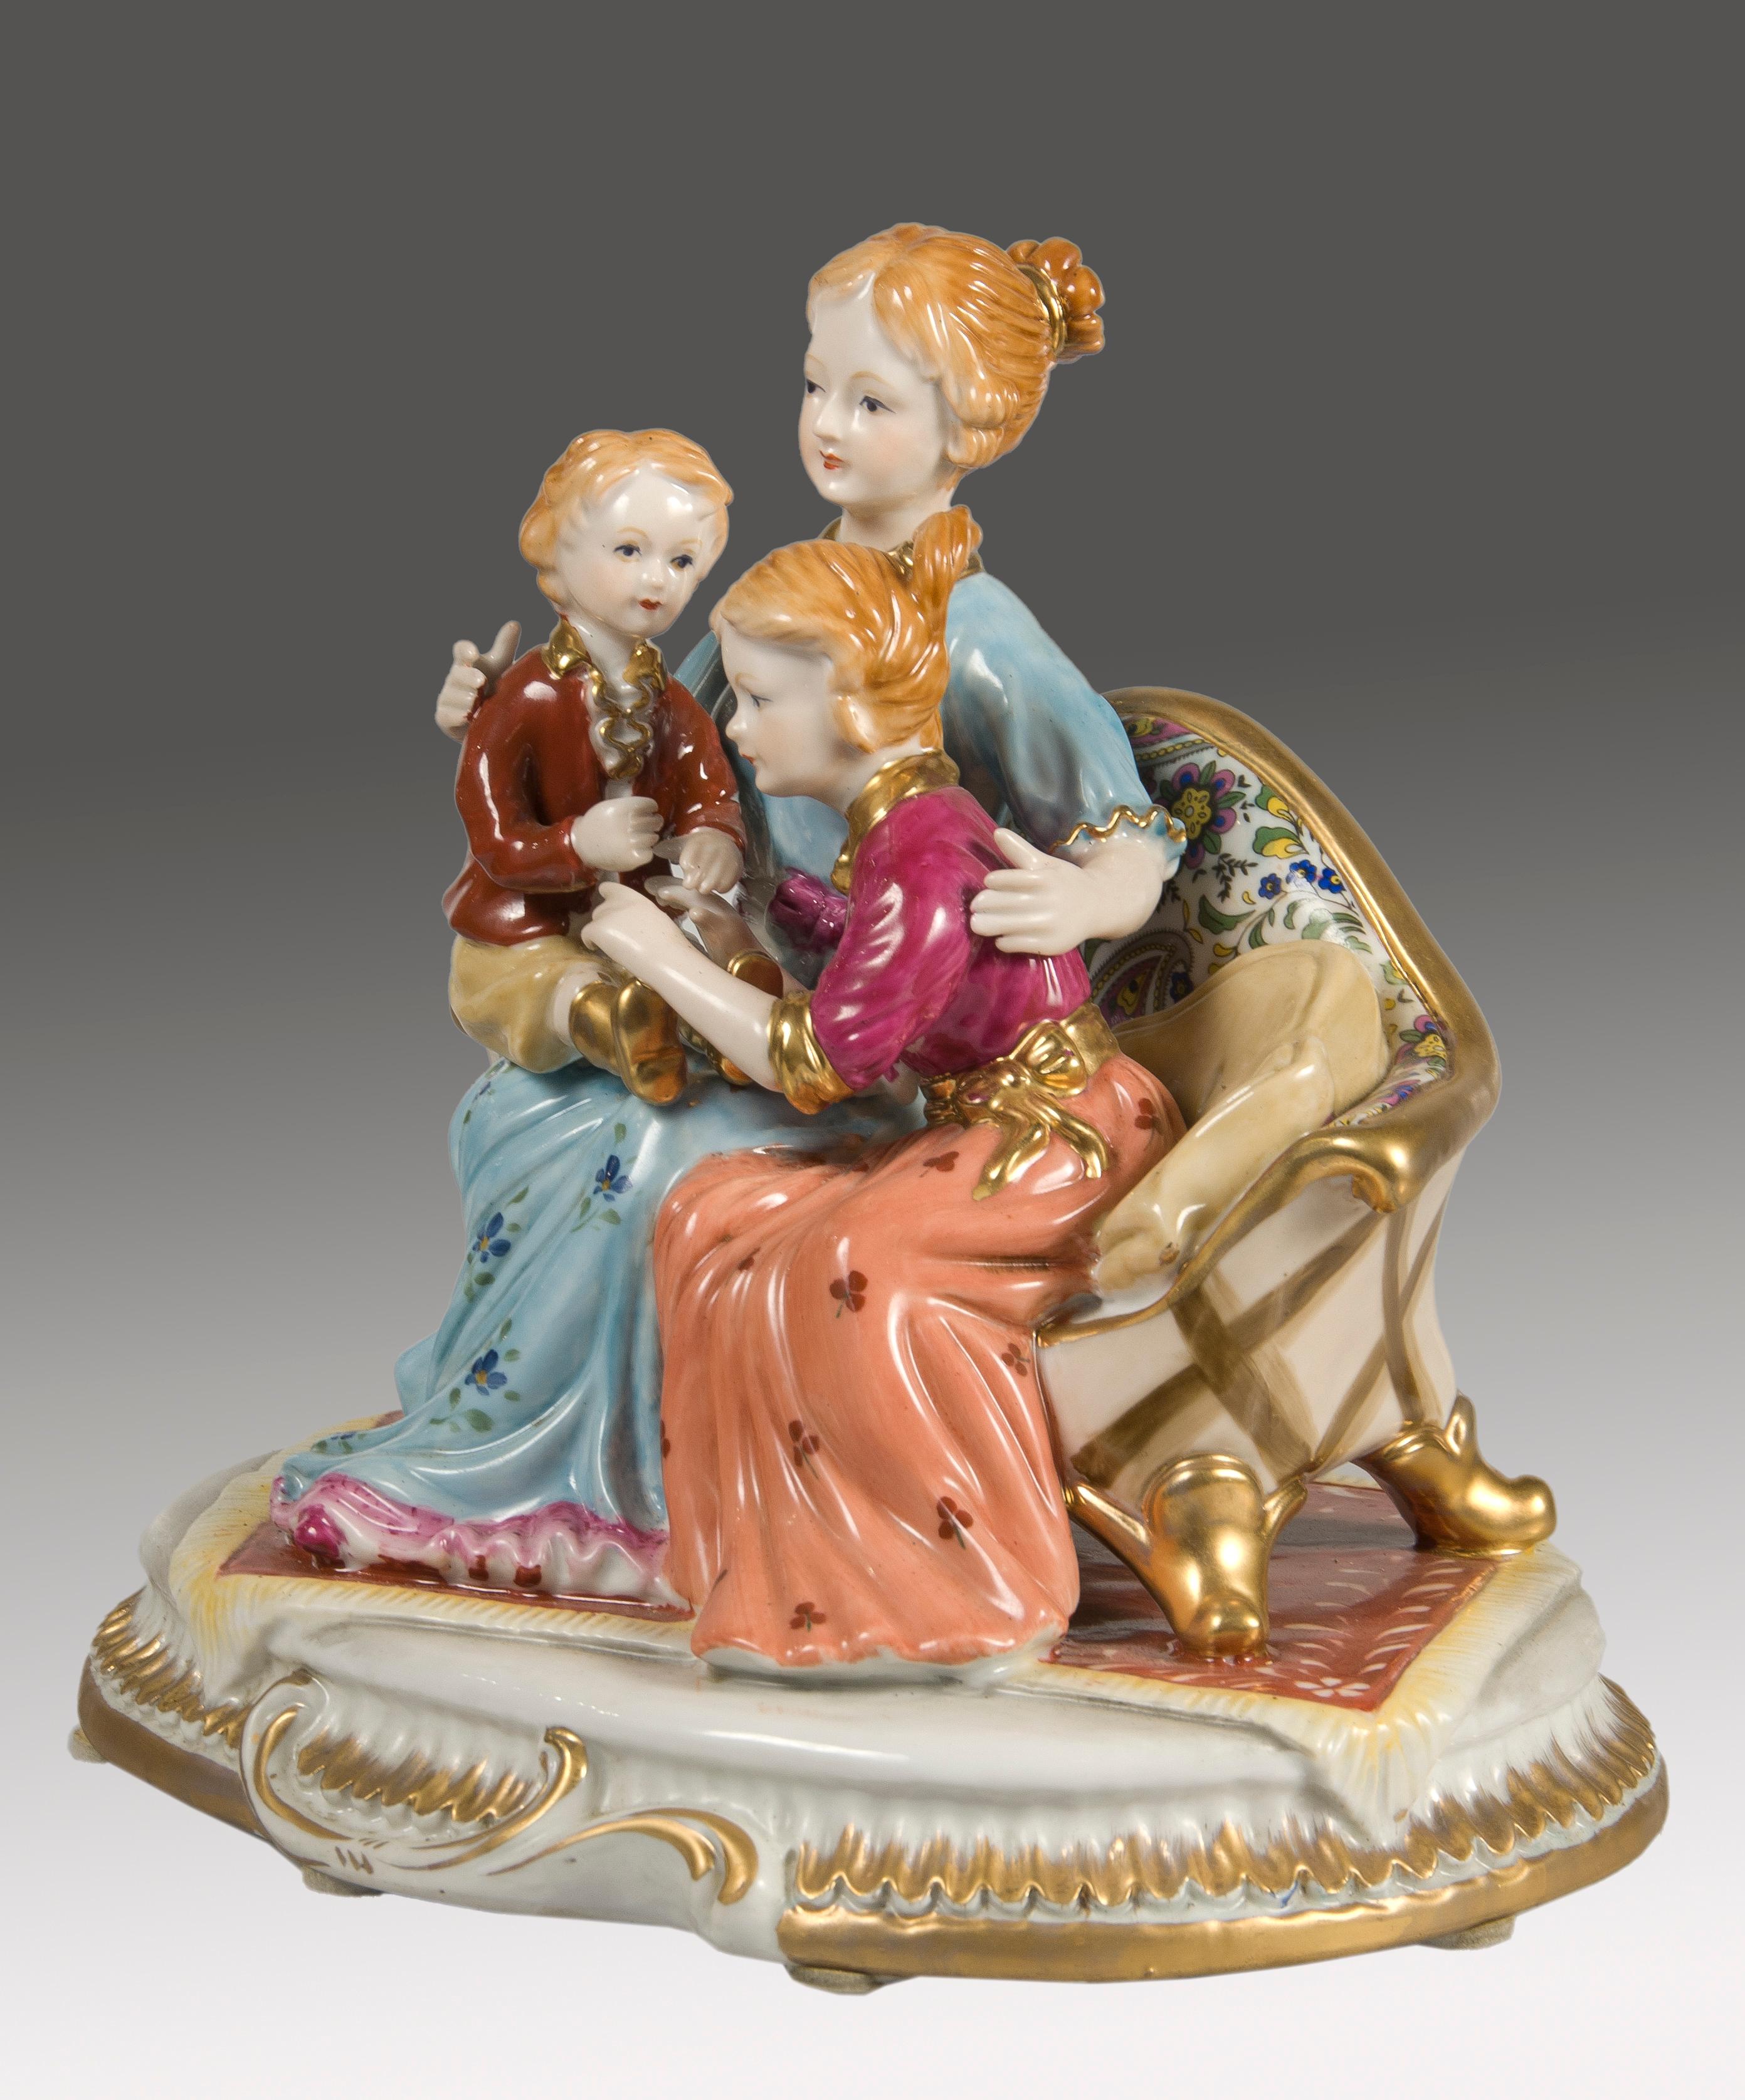 Other Family Time, Porcelain, after Models from Sèvres, 20th Century